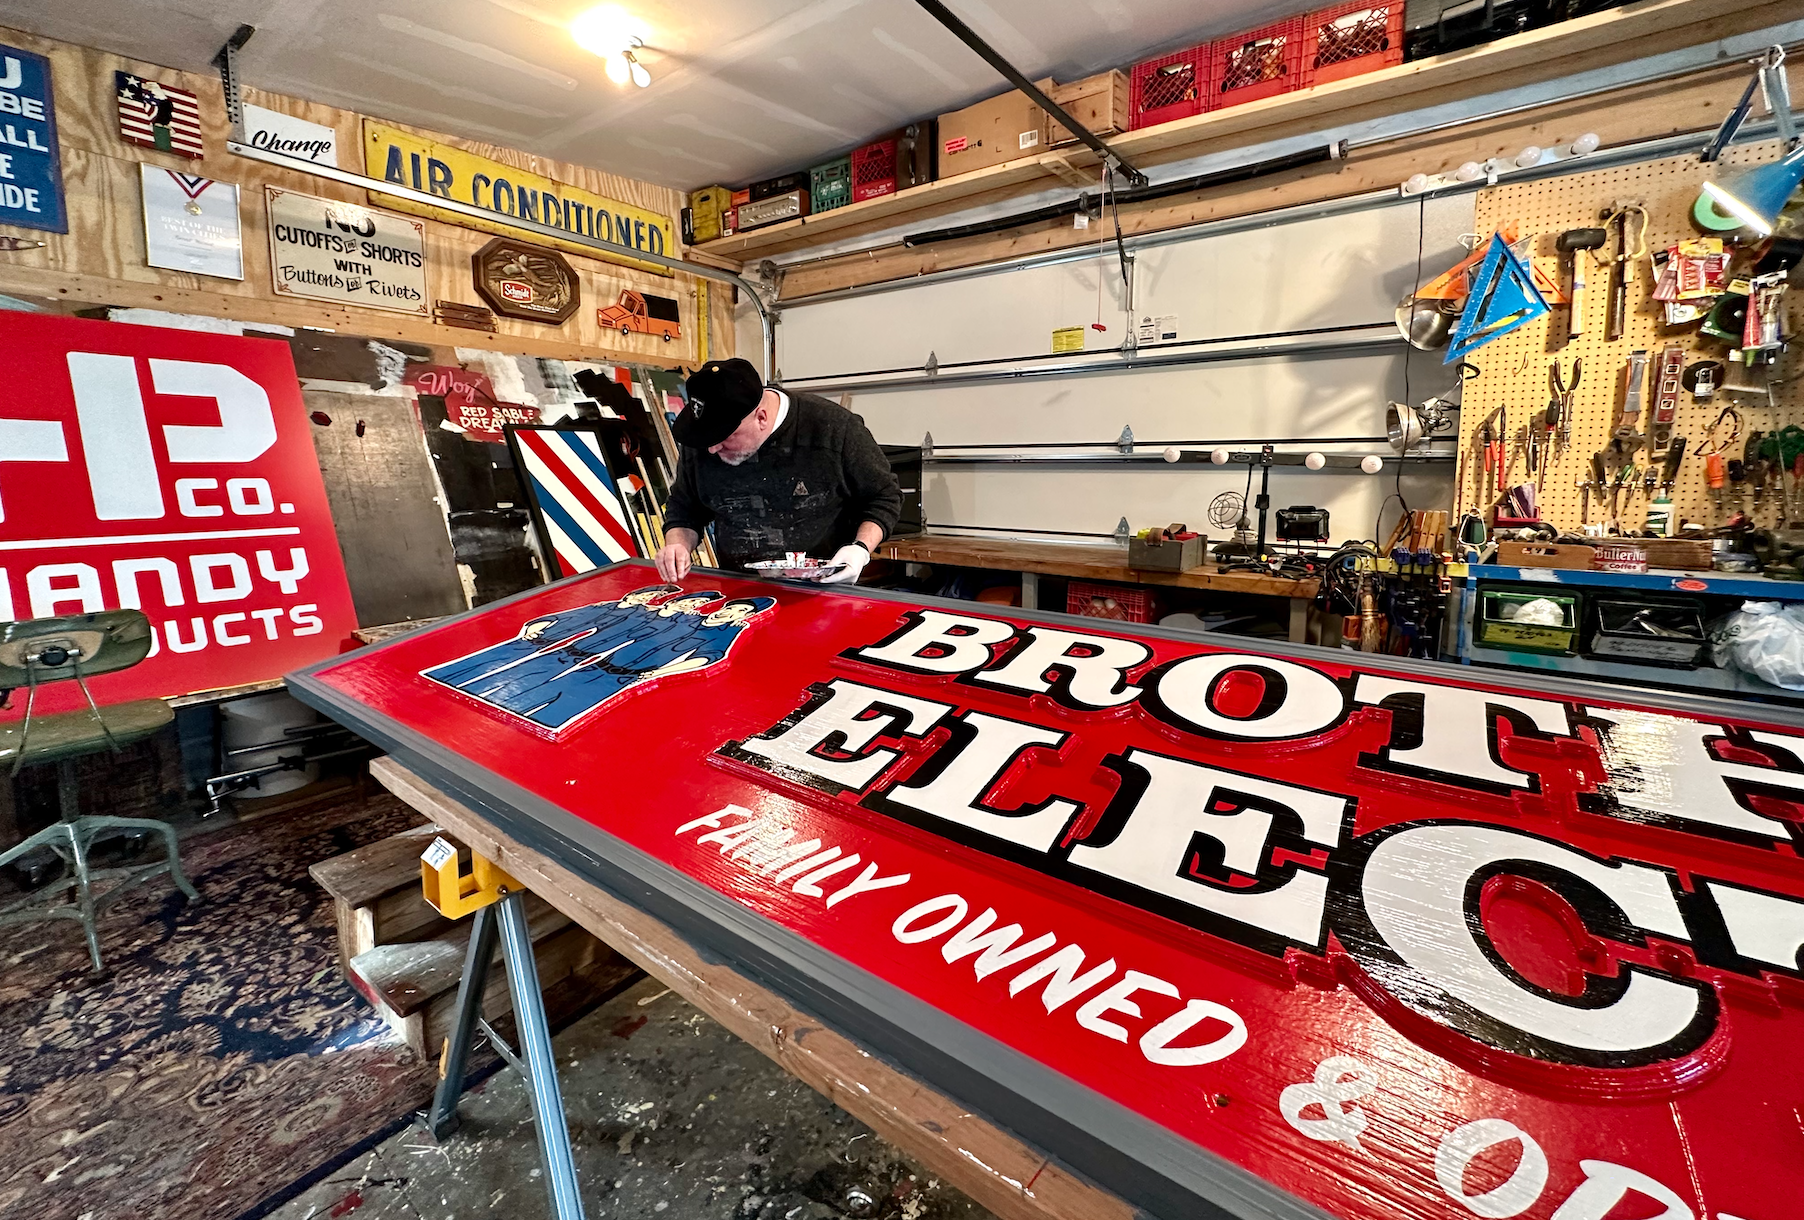 a man paints a bright red sign reading "brothers electric" in a garage studio space